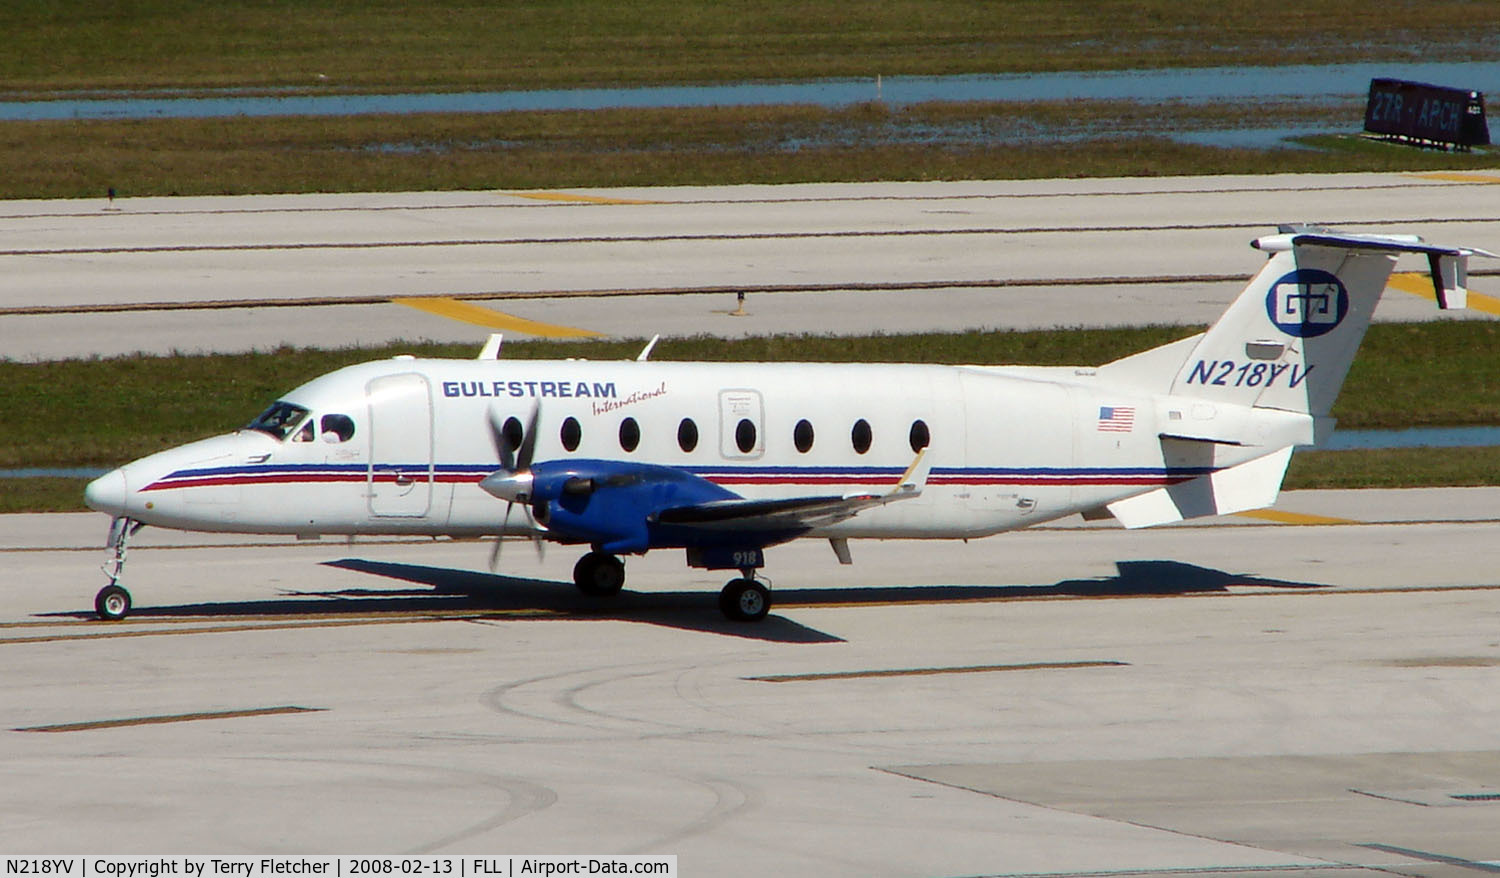 N218YV, 1996 Beech 1900D C/N UE-218, Gulfstream International B1900D taxies off stand at Ft Lauderdale Int